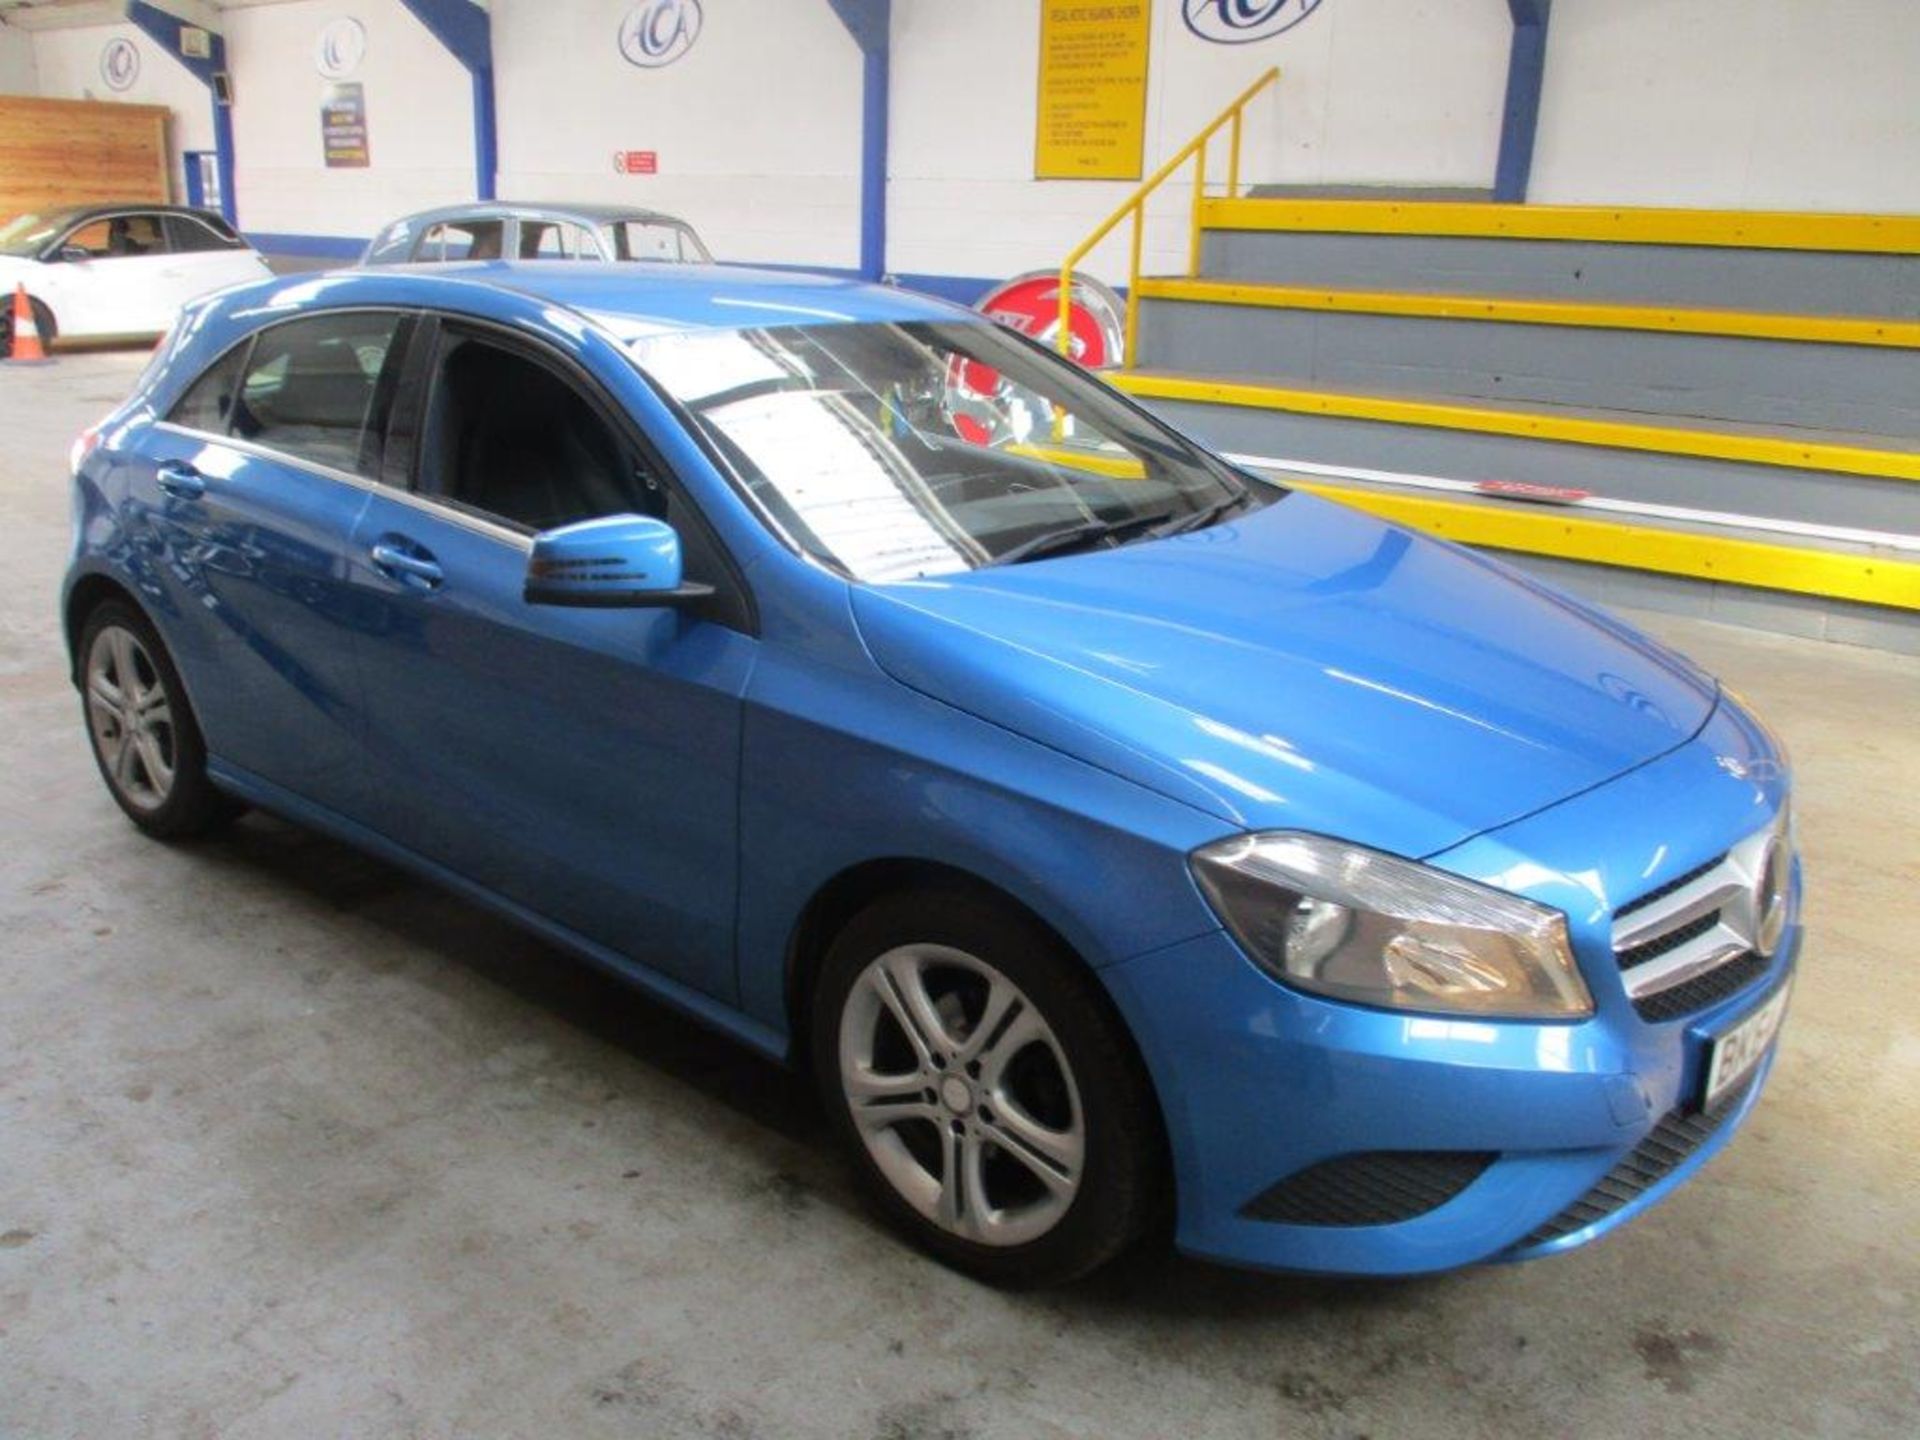 64 14 Mercedes A180 Blue-CY Sport - Image 4 of 10